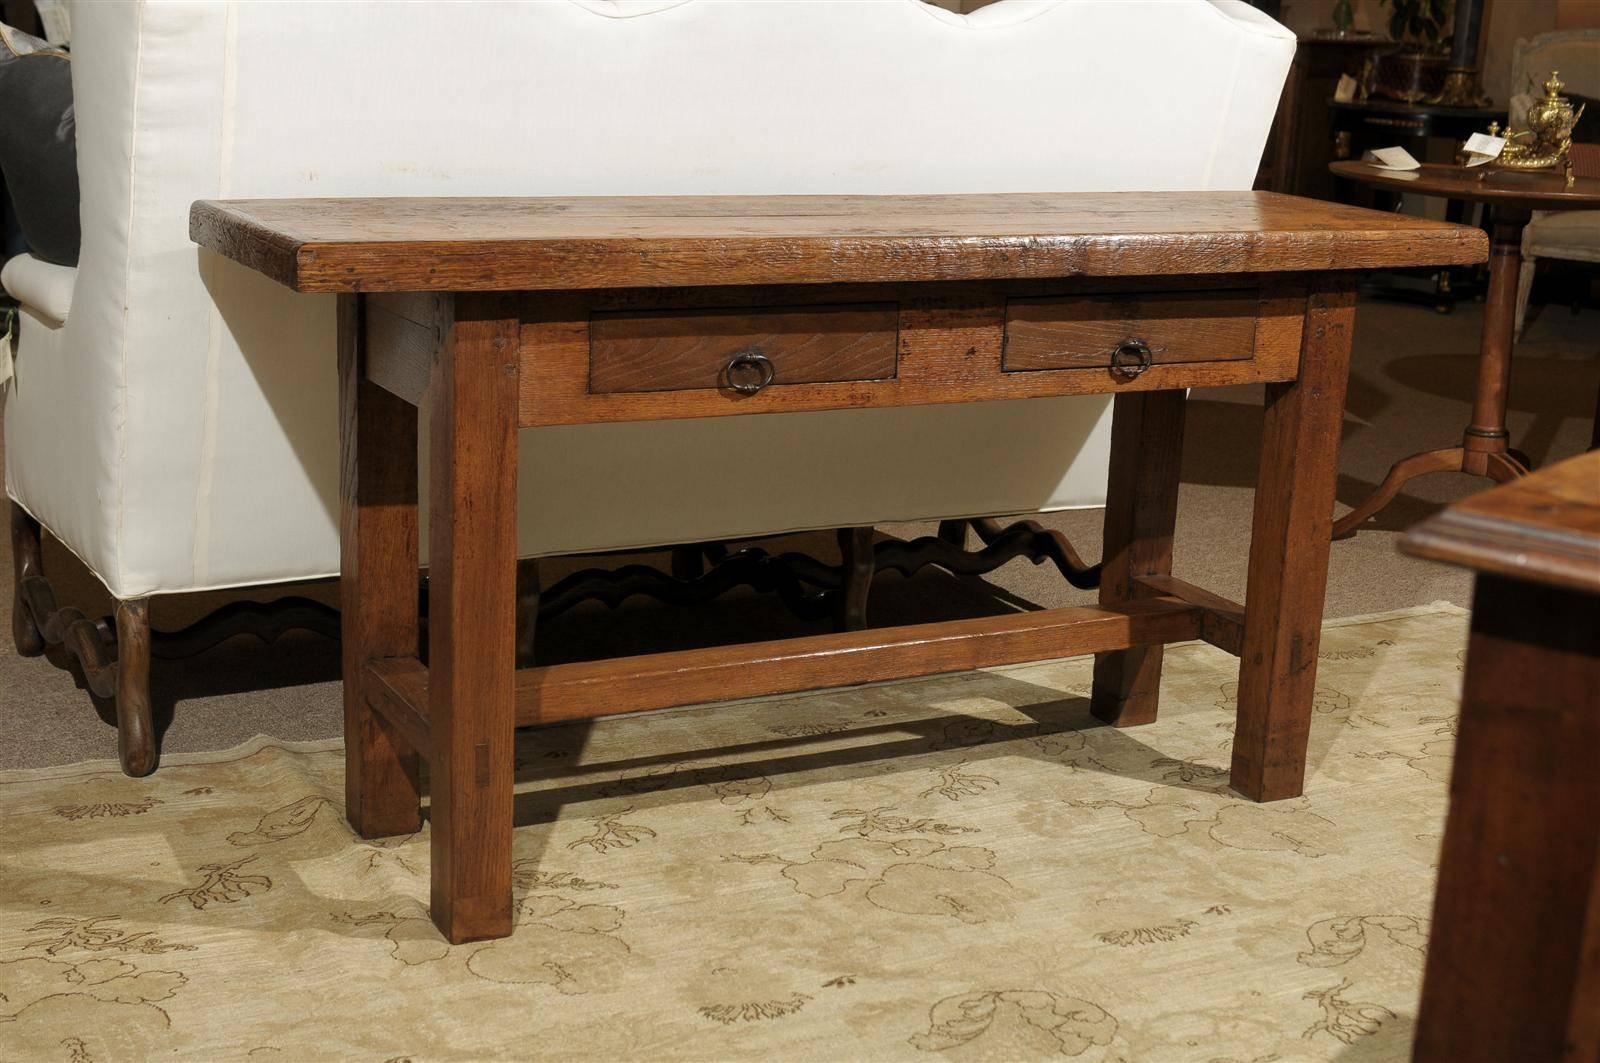 This table would be perfect for serving in a dining room, behind a sofa, or in a hallway. It is made of solid oak with a stretcher style base. Two smaller drawers make it complete. It is newly constructed from a 19th century French dining table, so